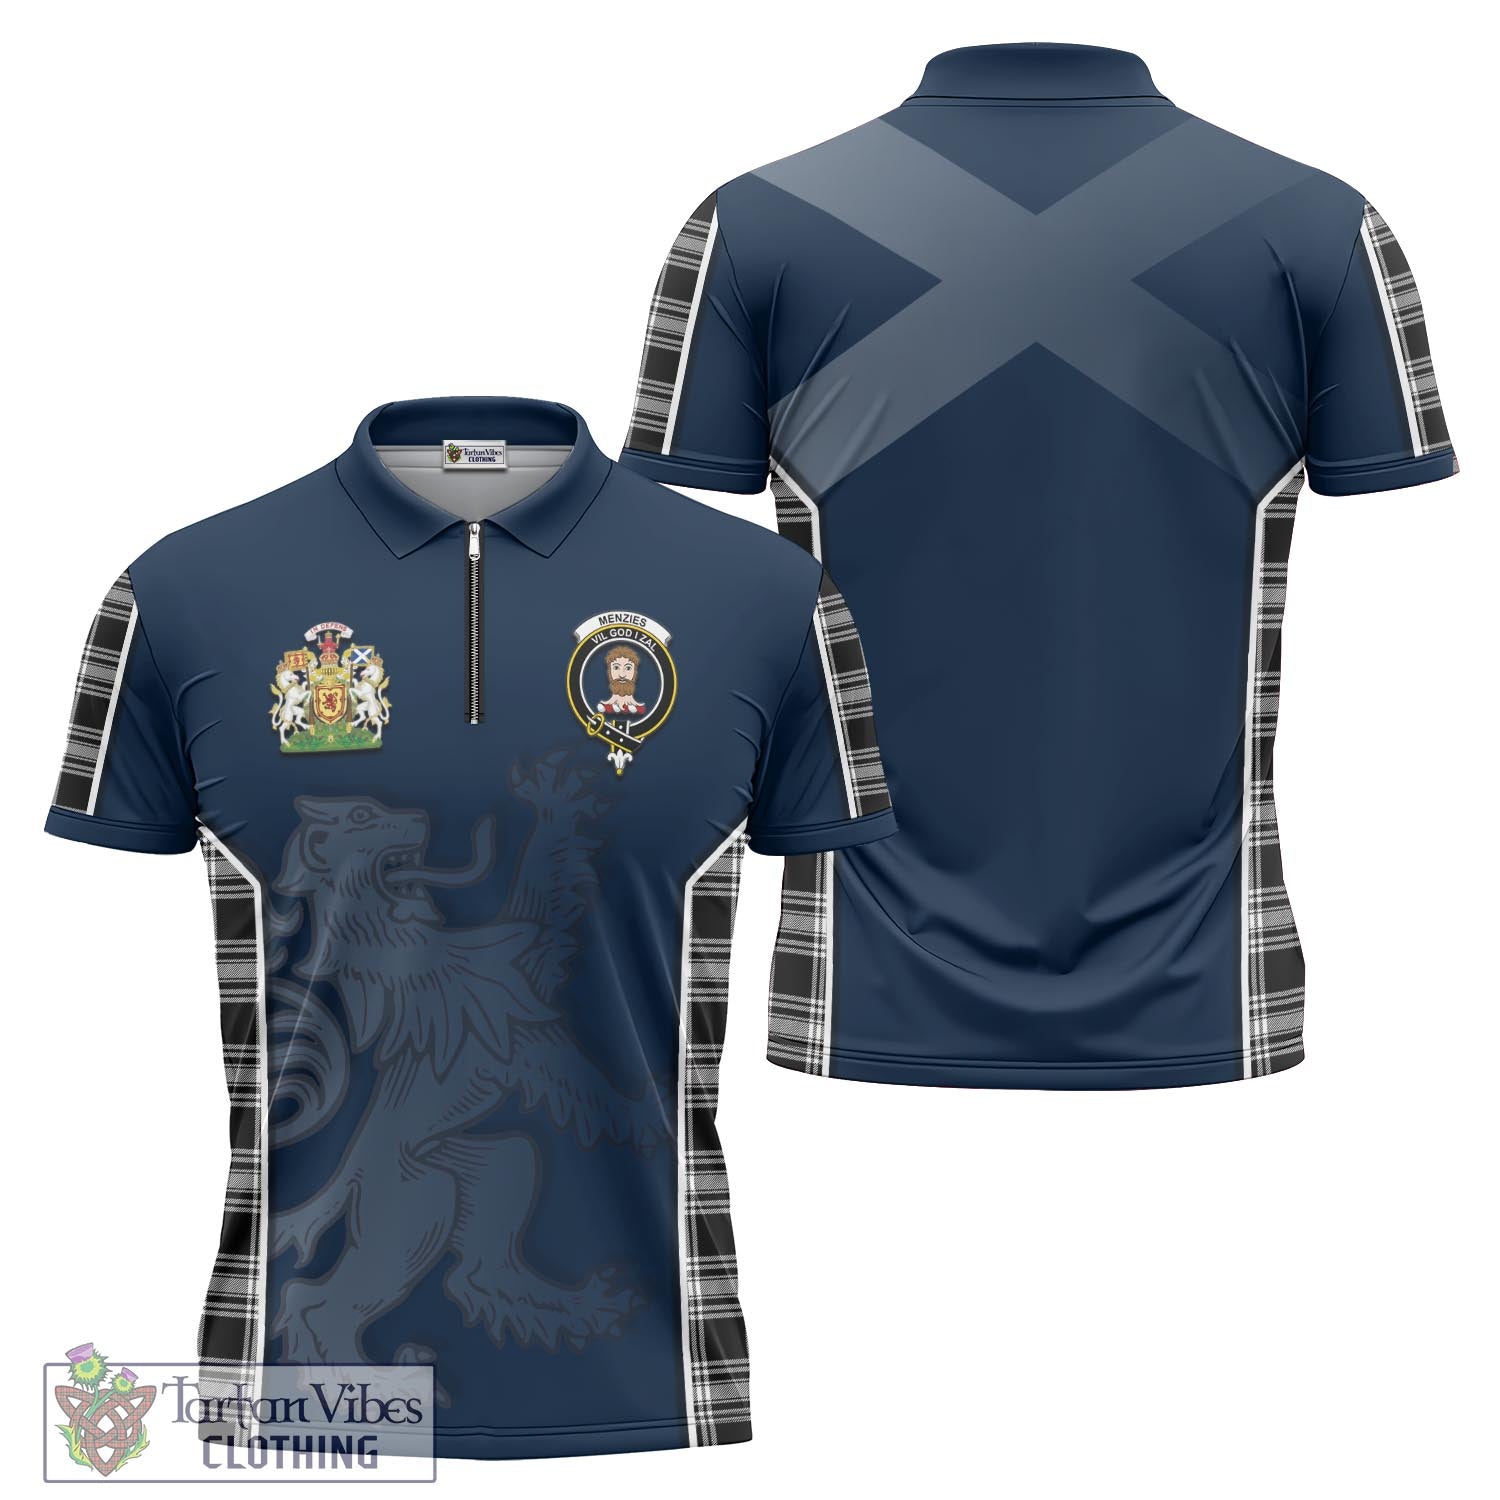 Tartan Vibes Clothing Menzies Black and White Tartan Zipper Polo Shirt with Family Crest and Lion Rampant Vibes Sport Style